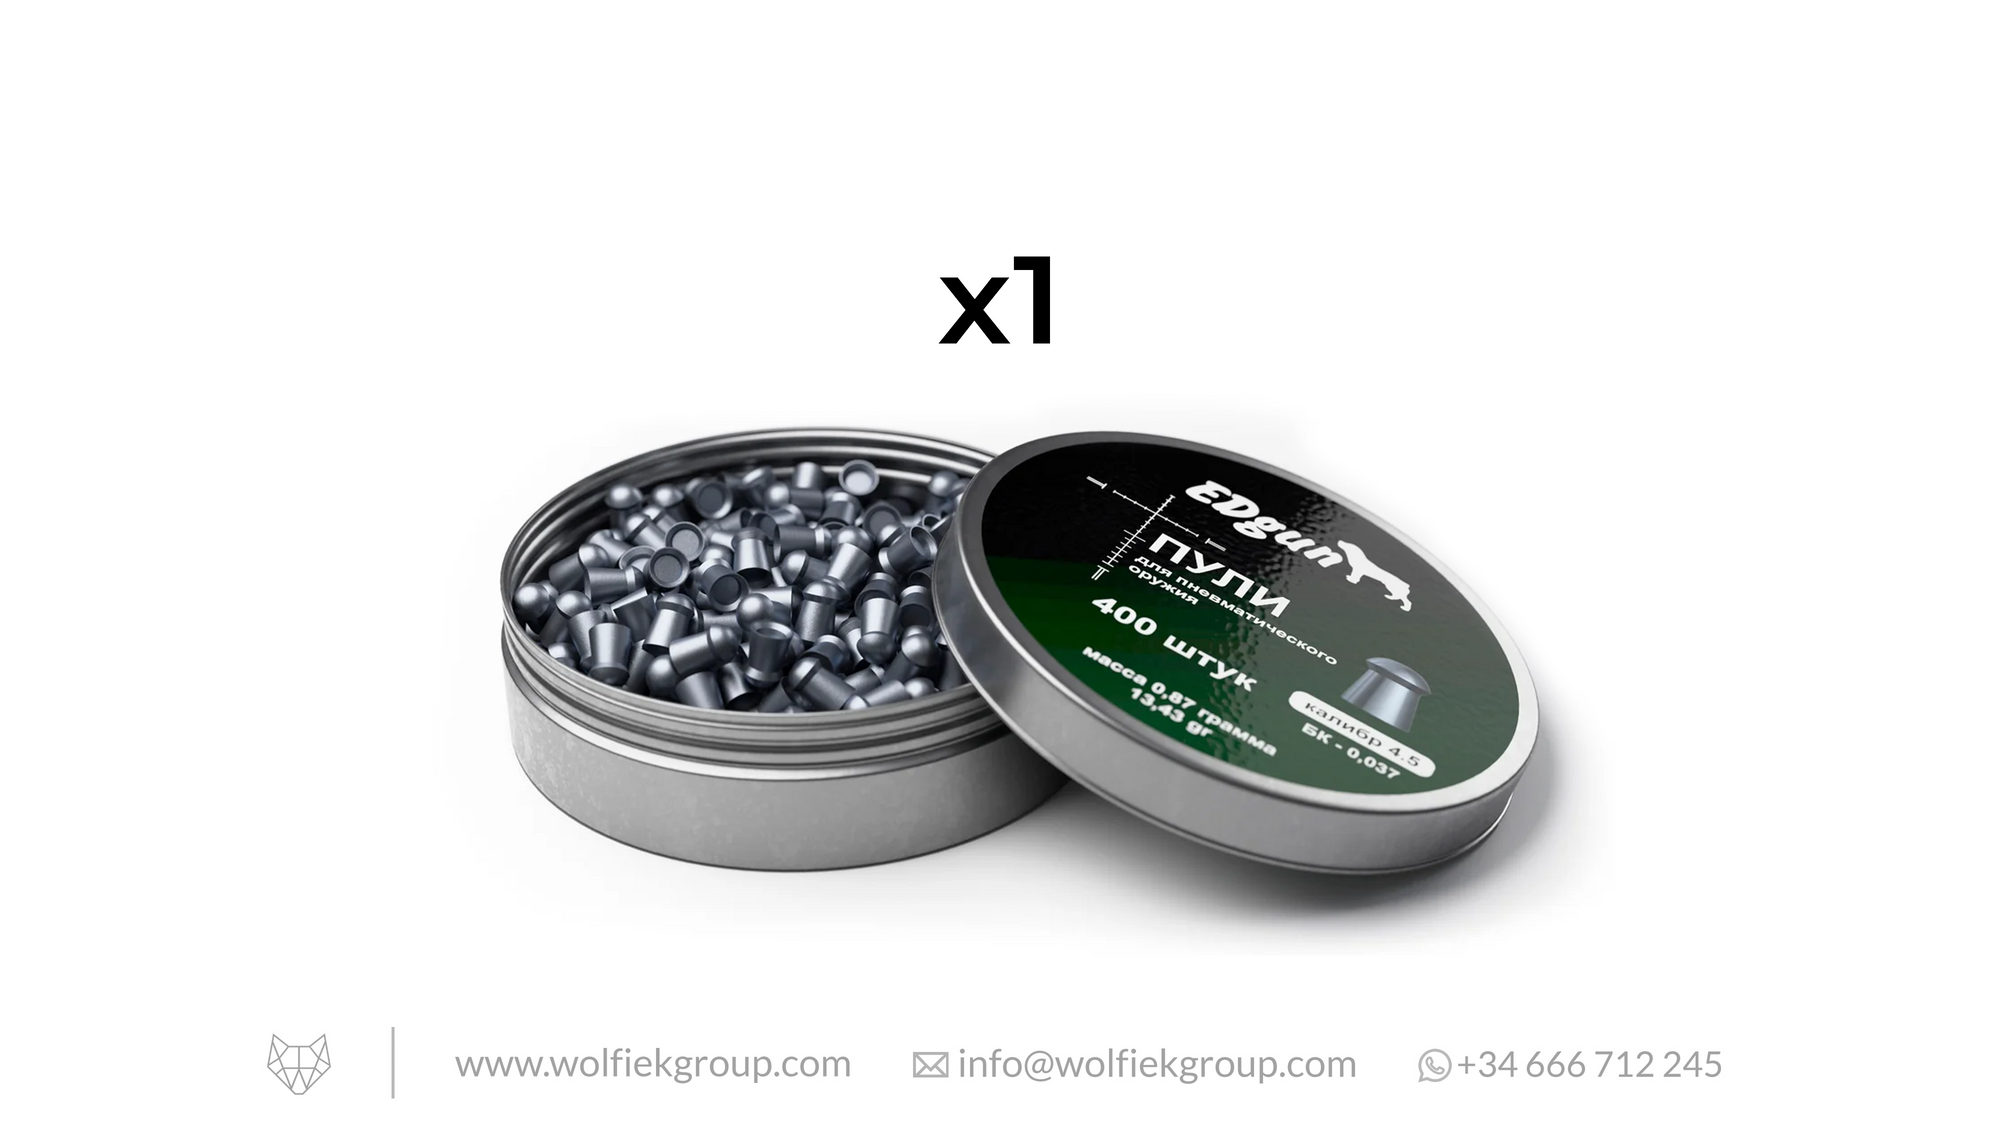 EDgun Premium Pellets Cal .177 (4.52mm) Weight 0,87g (13,43gr) with text buy 4 get 1 for free